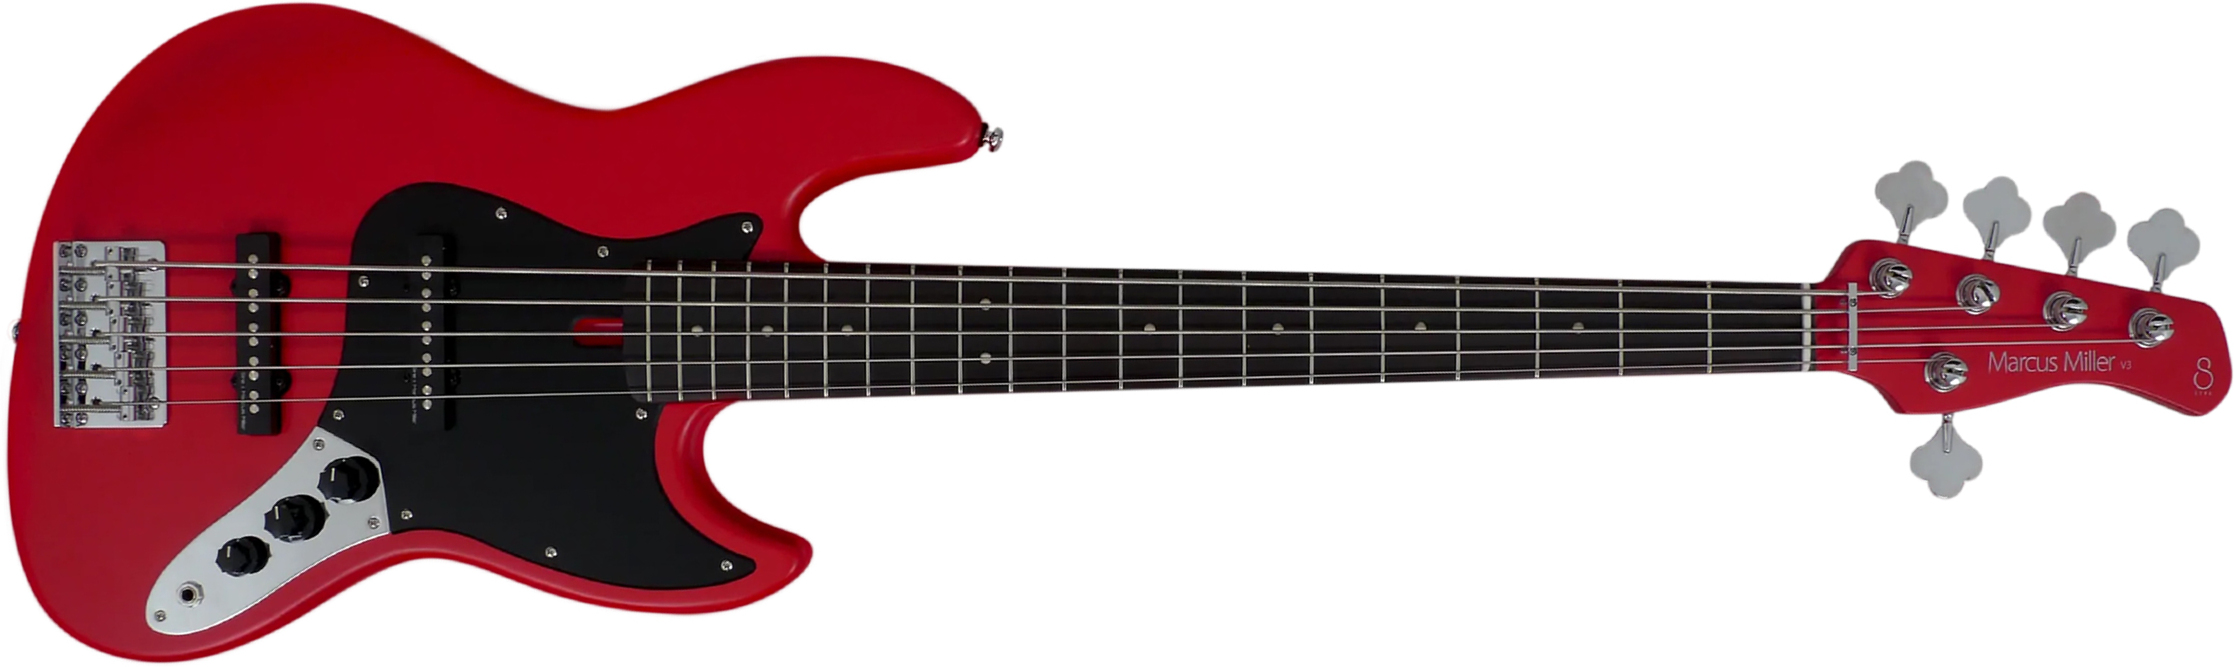 Marcus Miller V3p 5st 5c Rw - Red Satin - Solidbody E-bass - Main picture